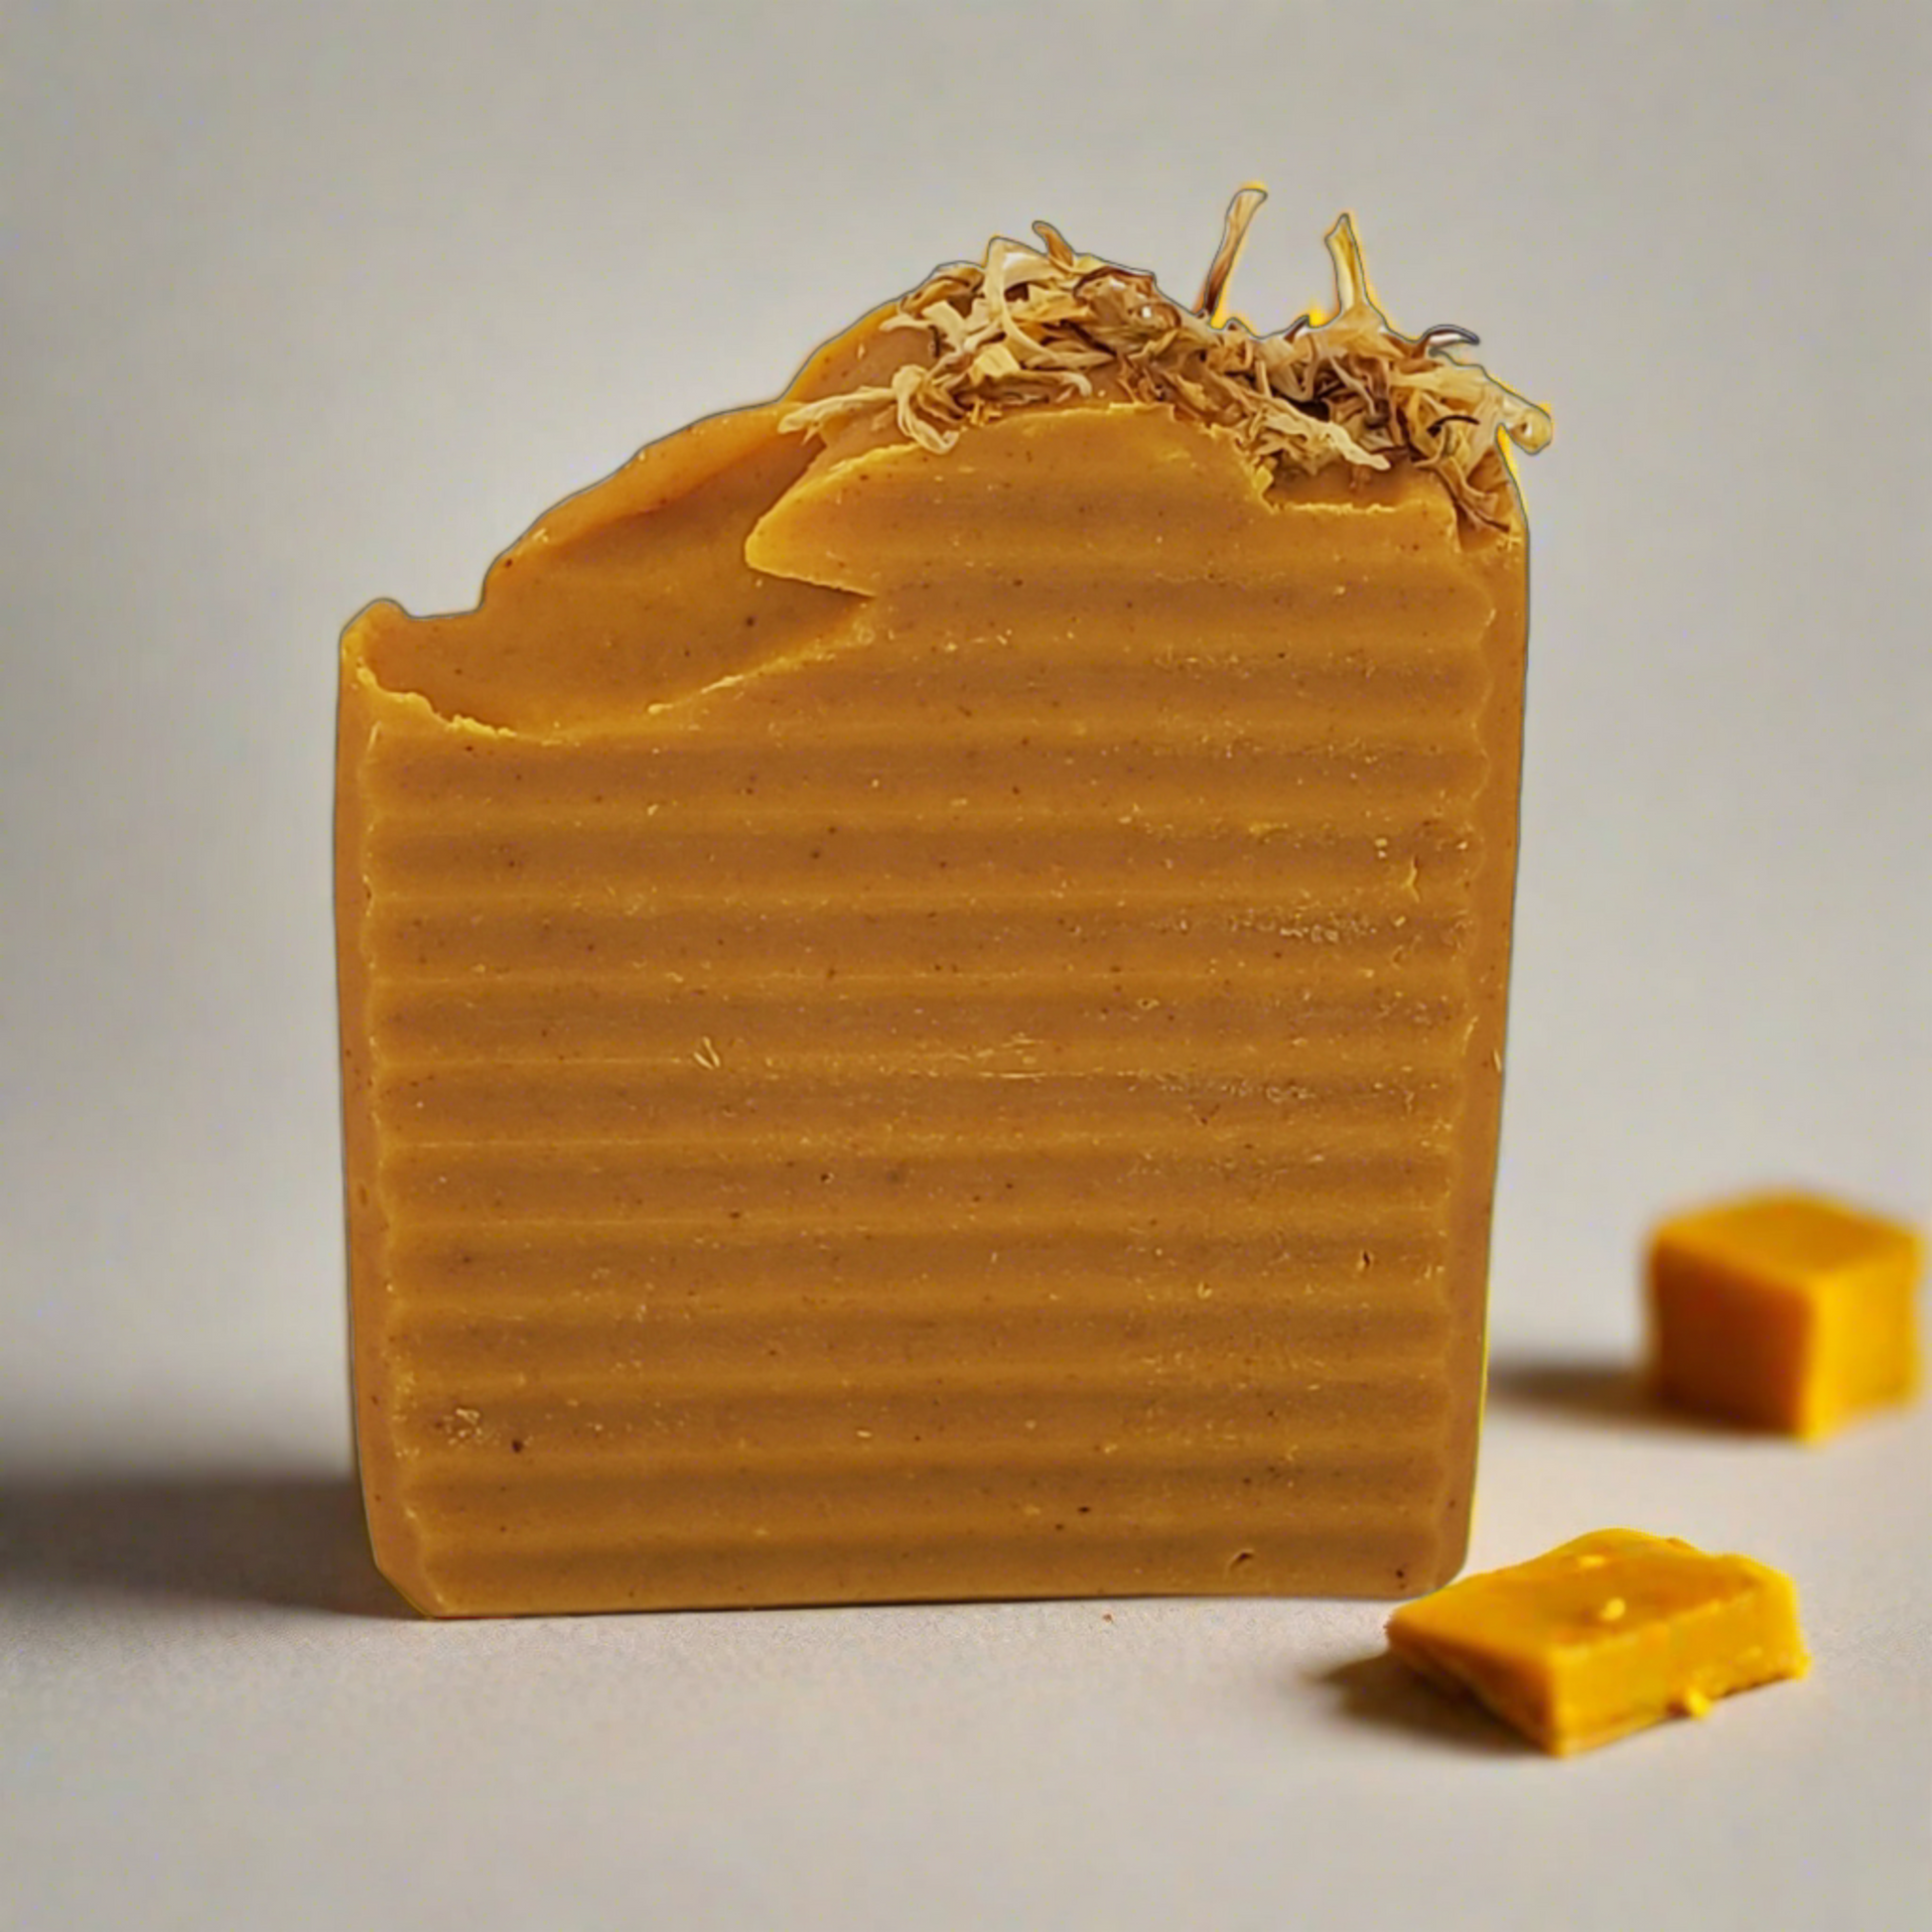 Image of Clarifying Turmeric Natural Bar Soap from The Butter Project.